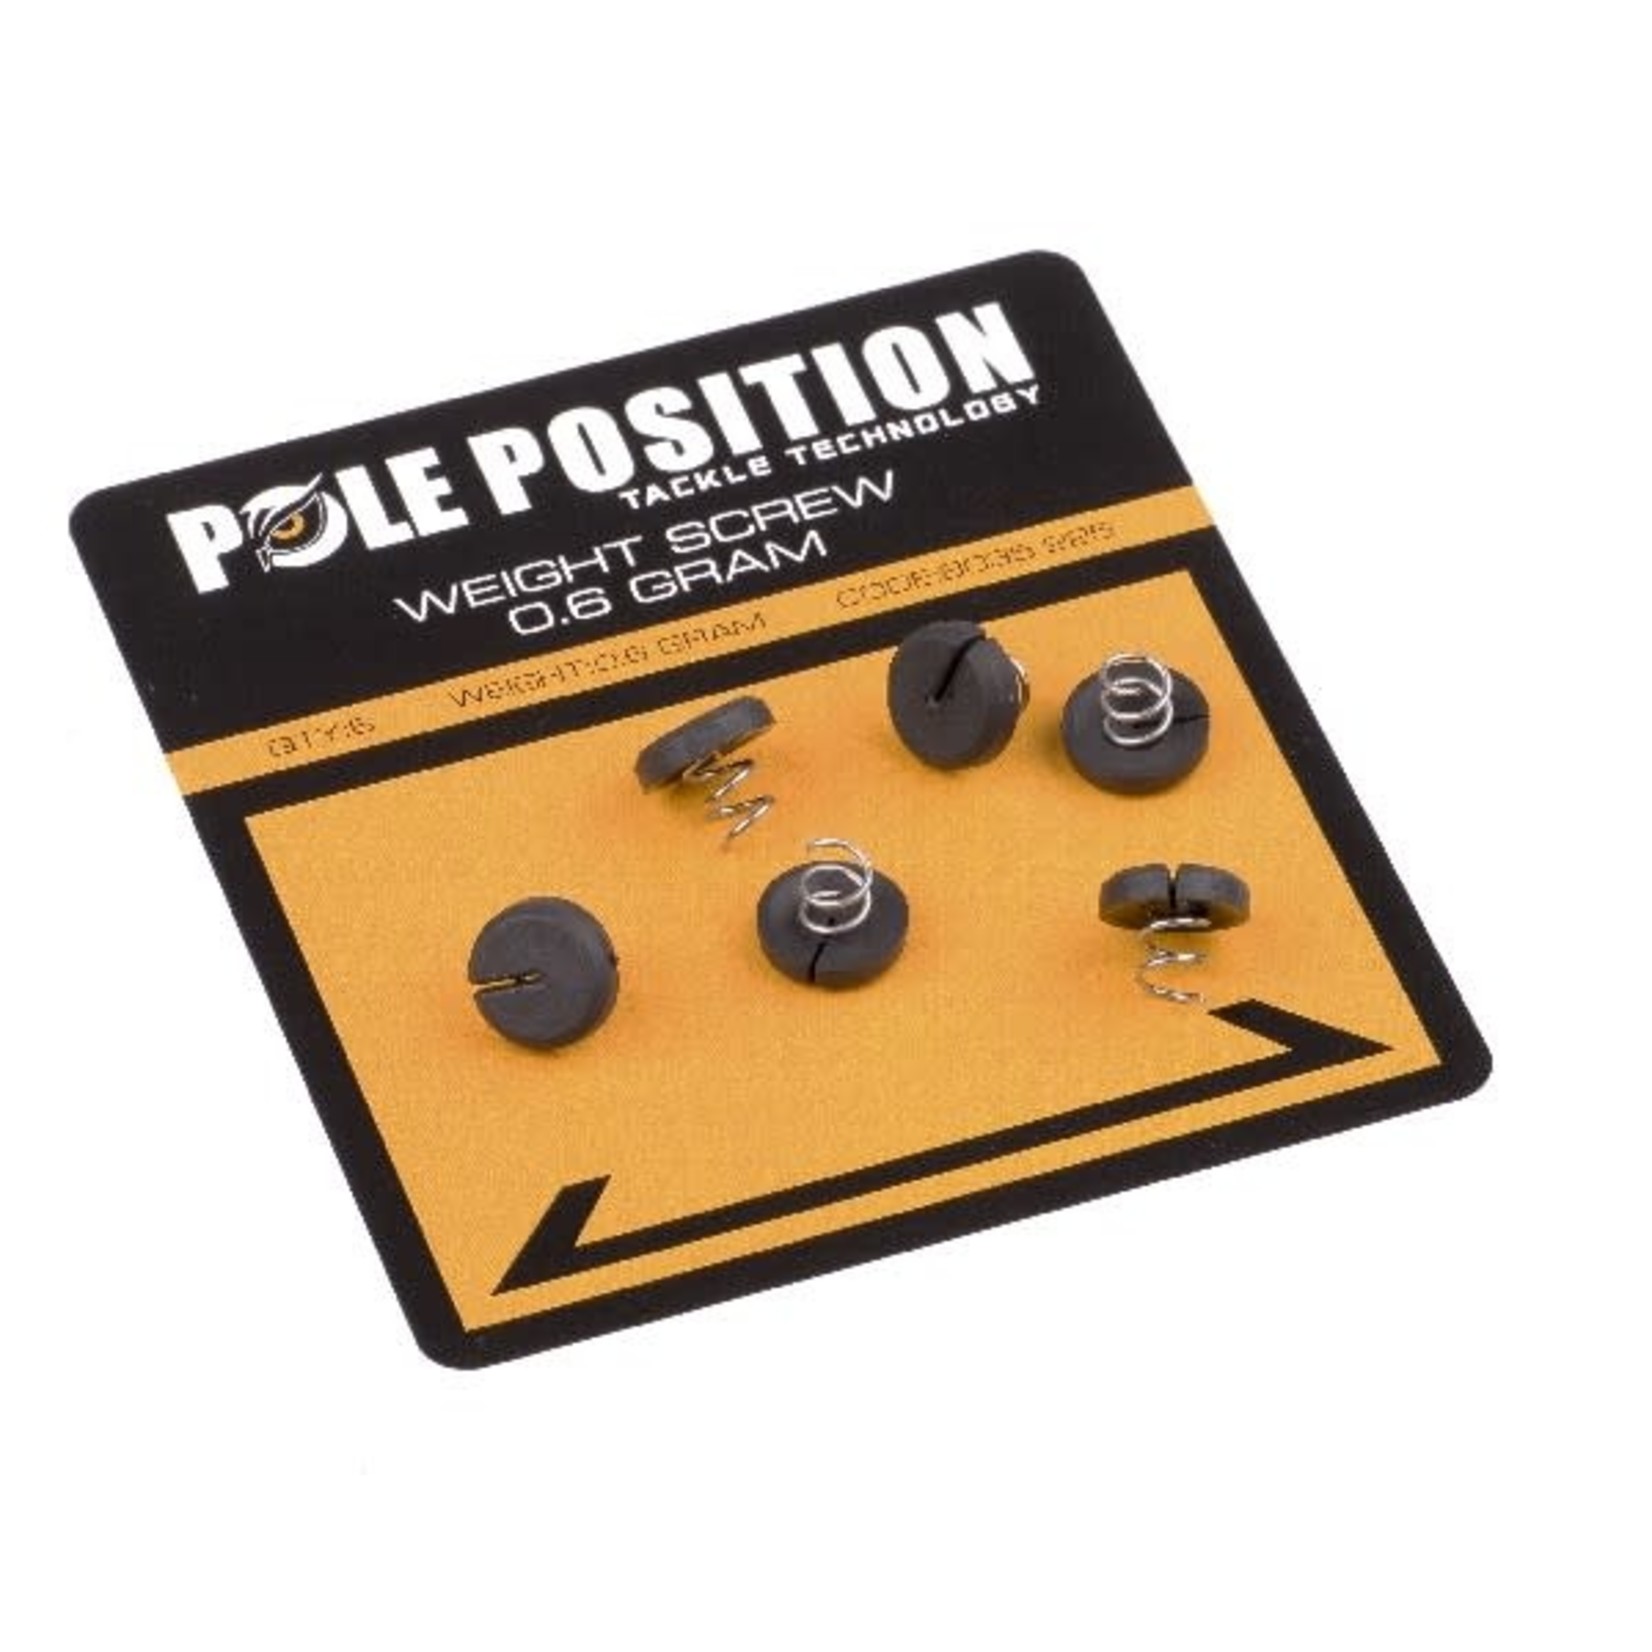 POLE POSITION Pole Position WEIGHT SCREW 0.8G